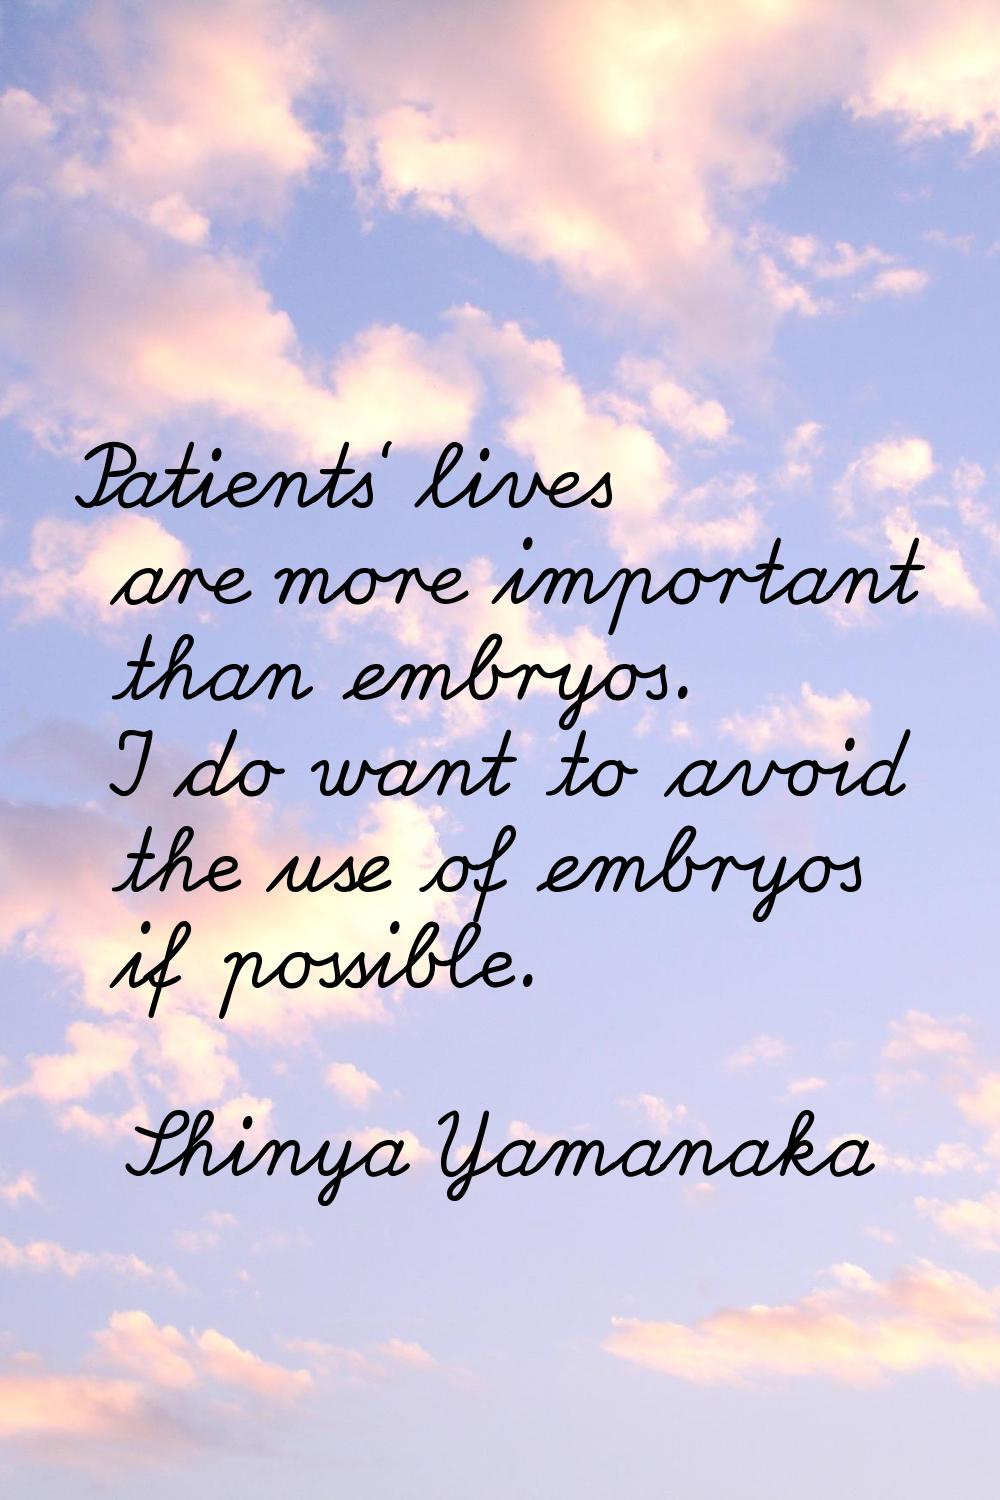 Patients' lives are more important than embryos. I do want to avoid the use of embryos if possible.